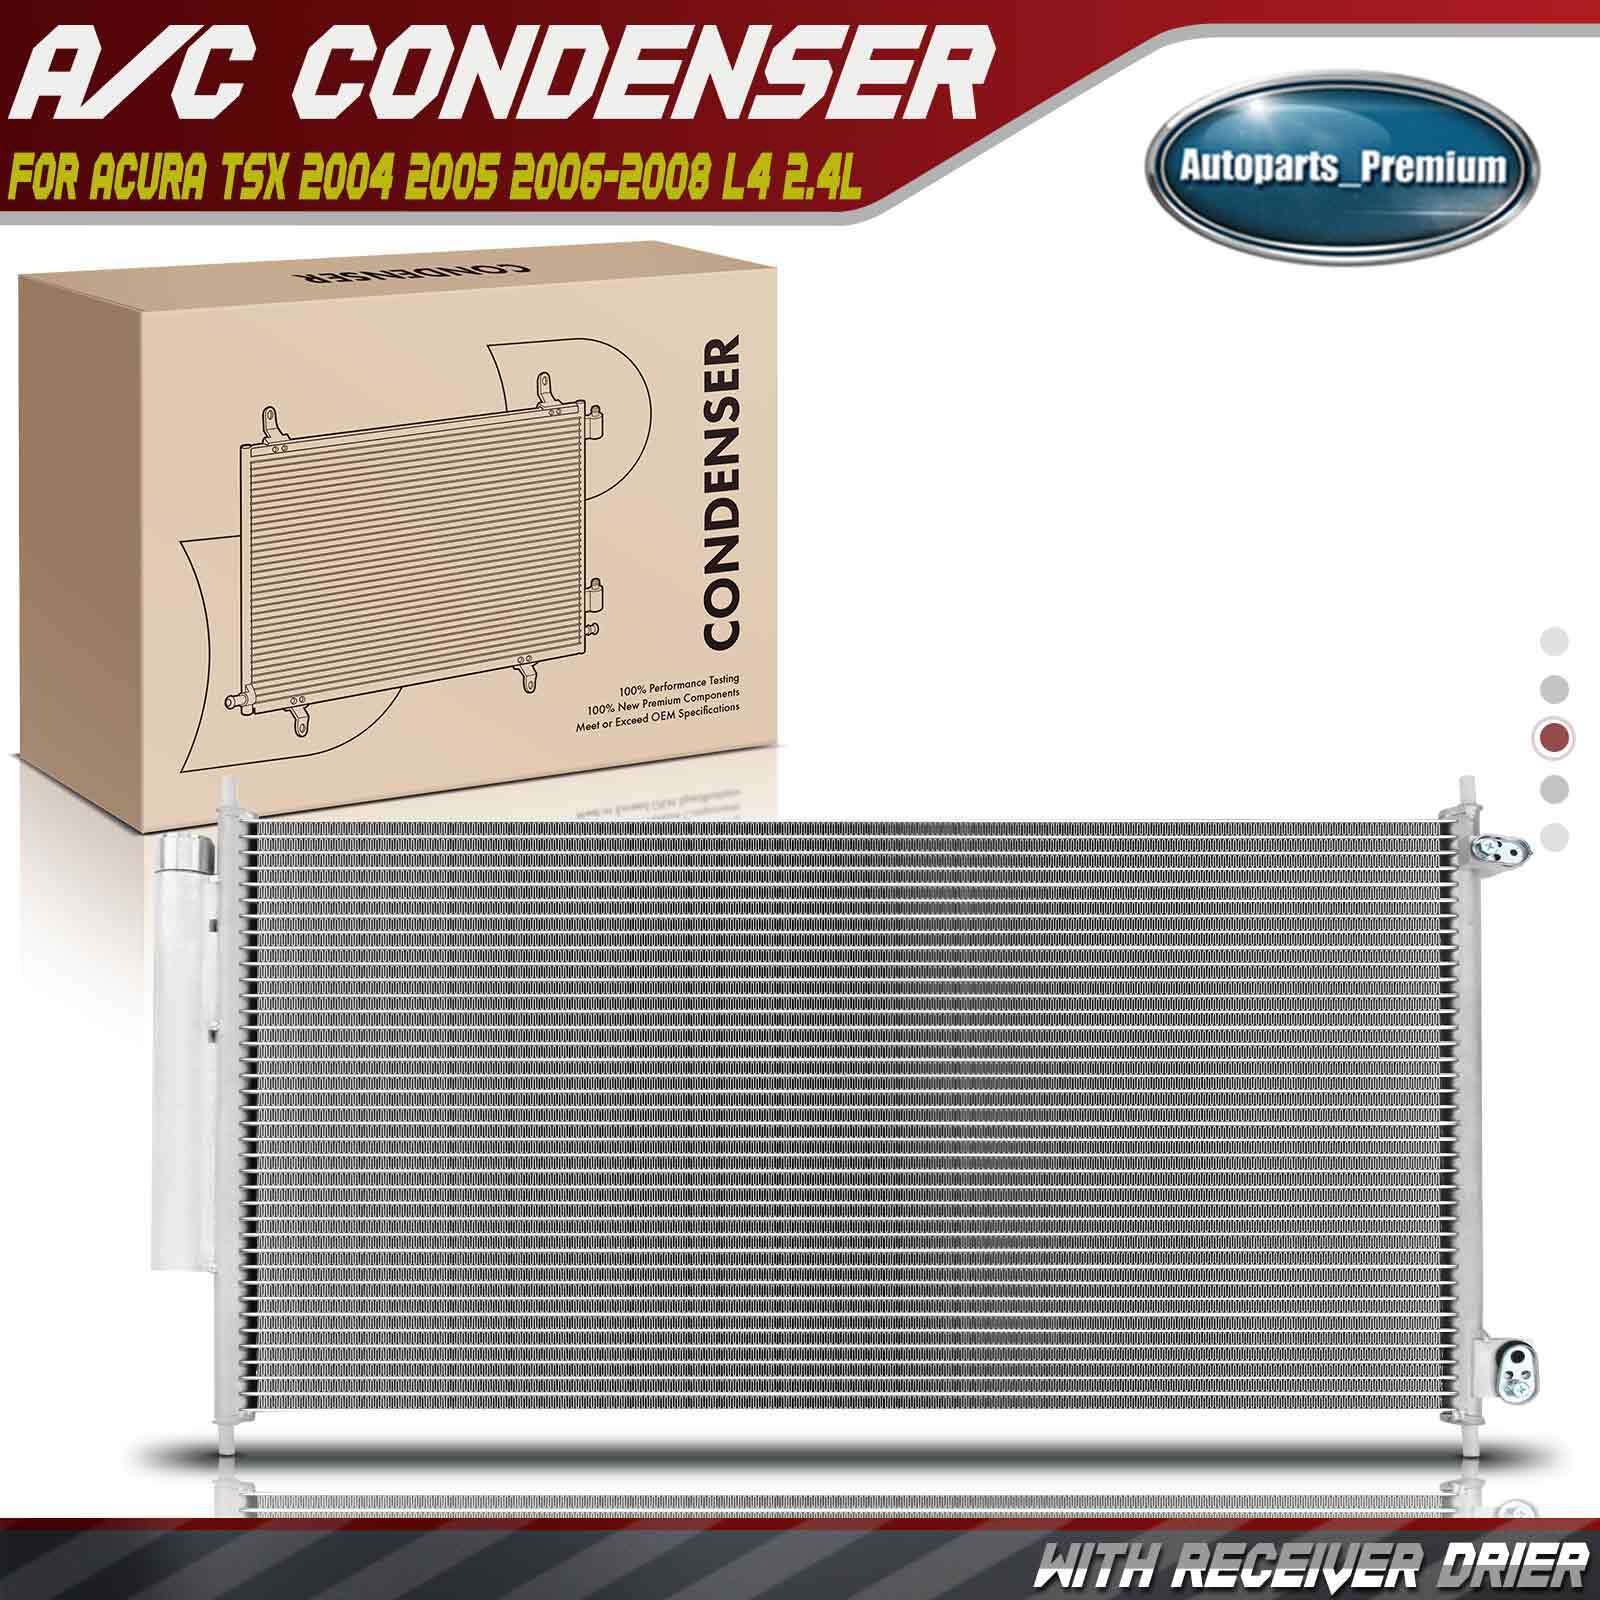 New AC Condenser A/C Air Conditioning w/ Drier for Acura TSX 2004-2008 L4 2.4L